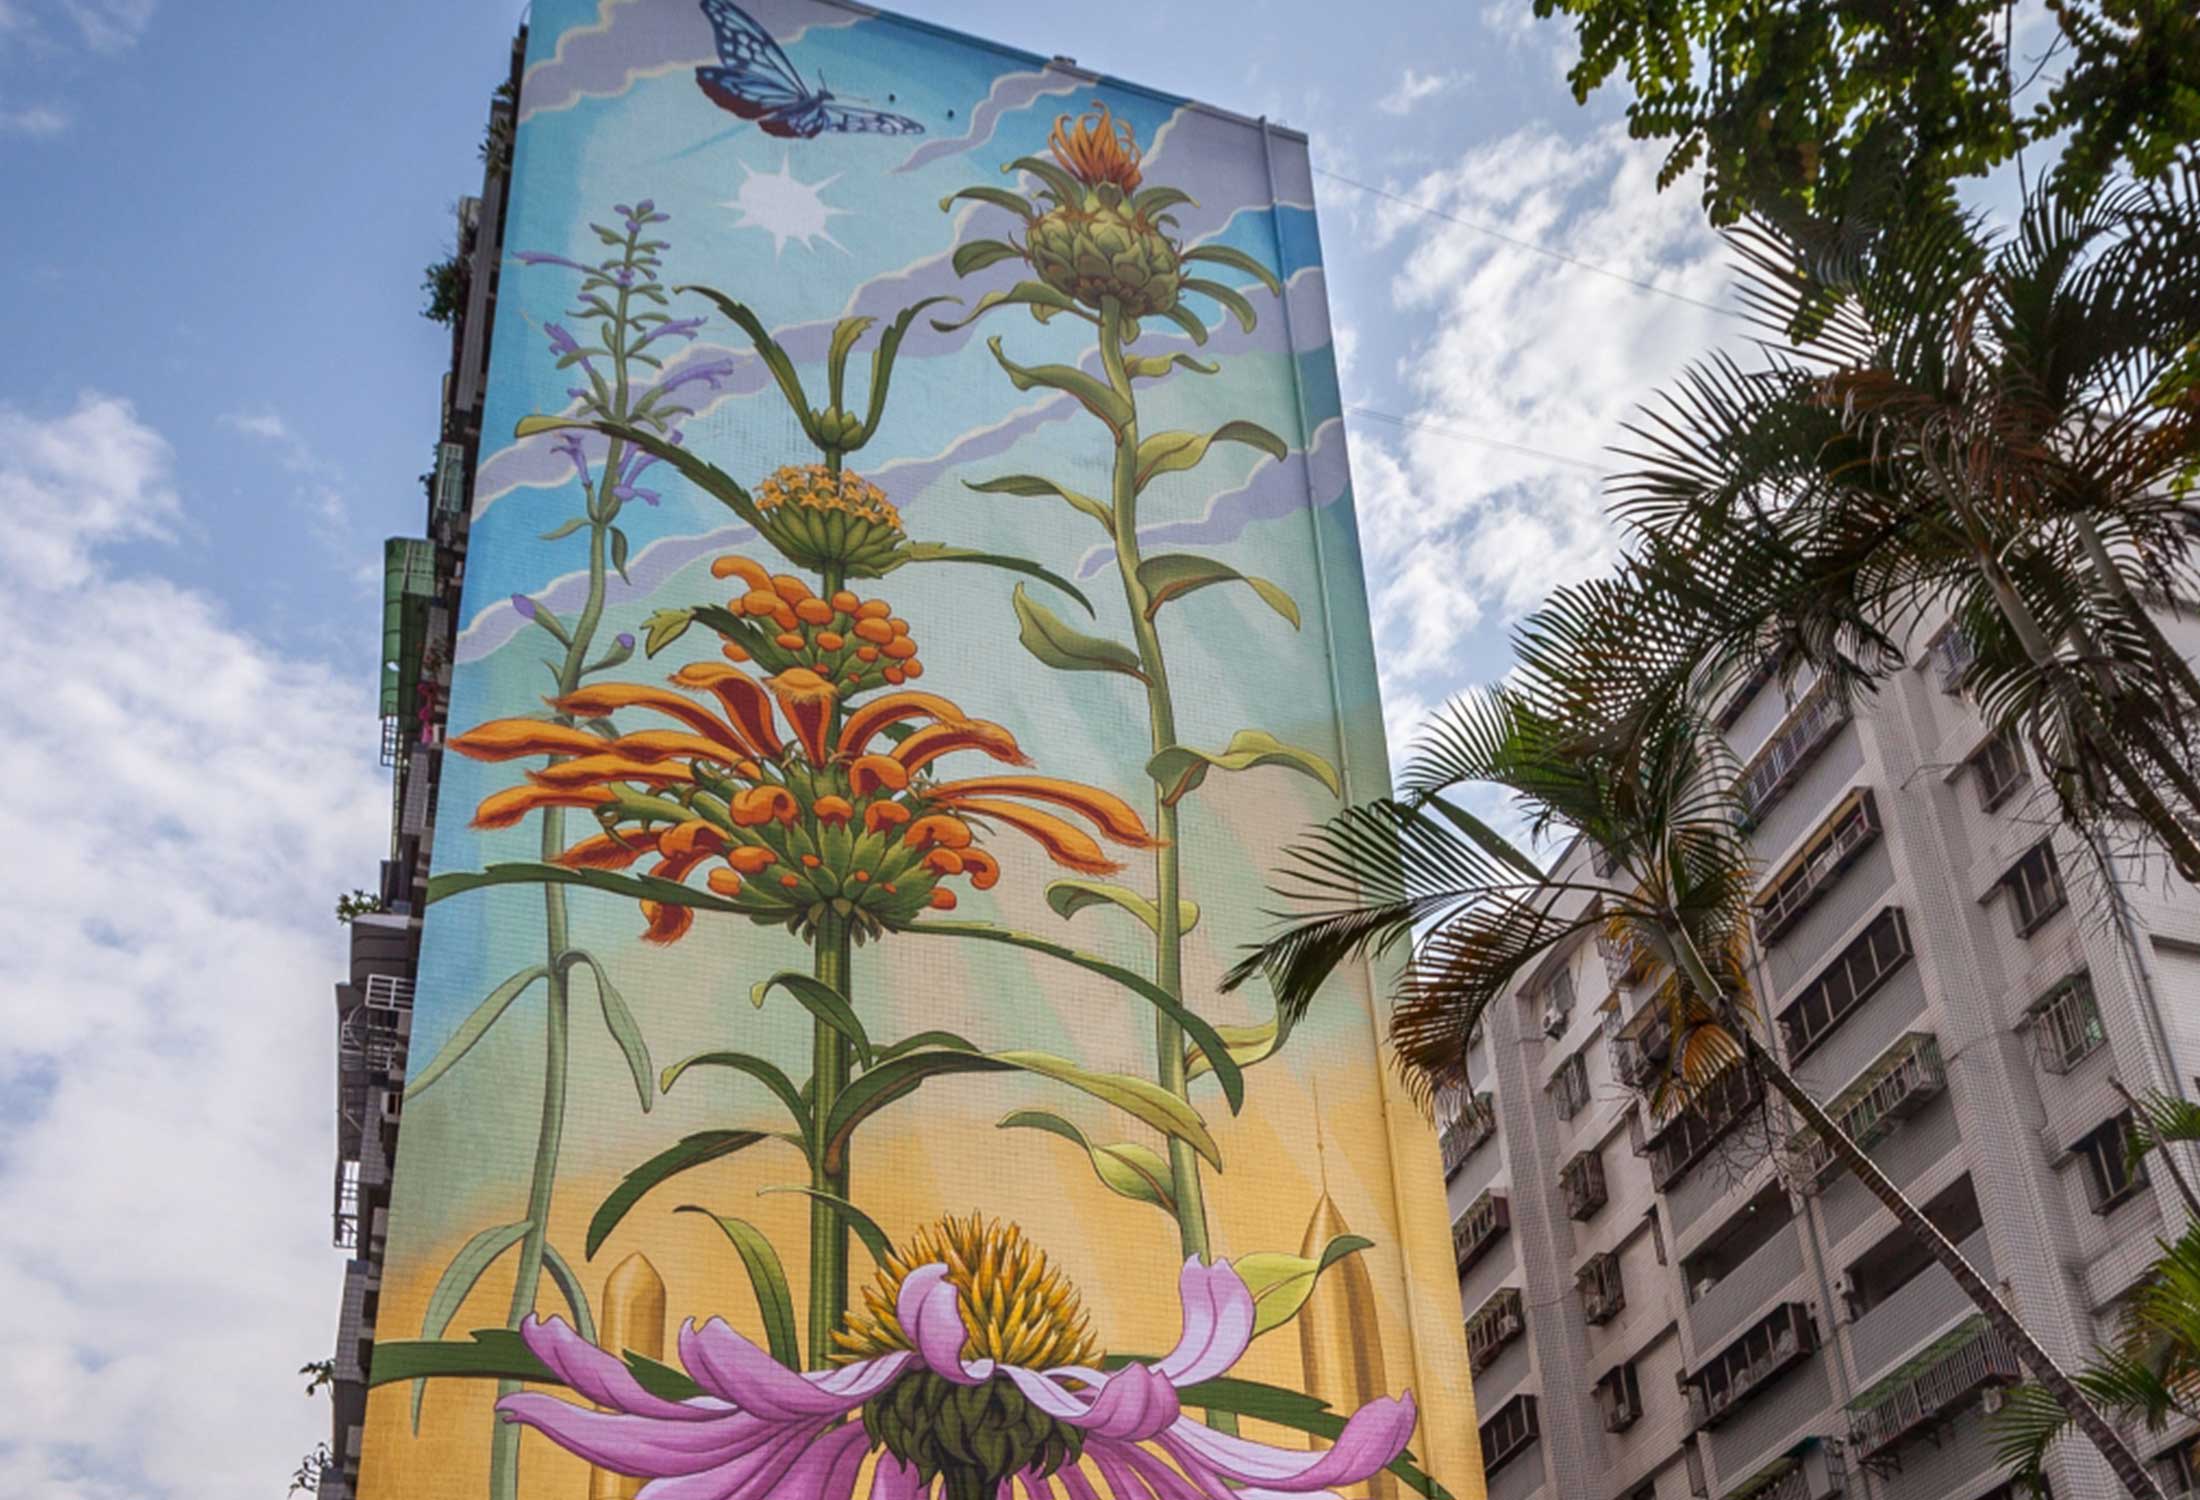 Outgrowing by Mona Caron is an enchanting and iconic mural that is a powerful example of art in public places.